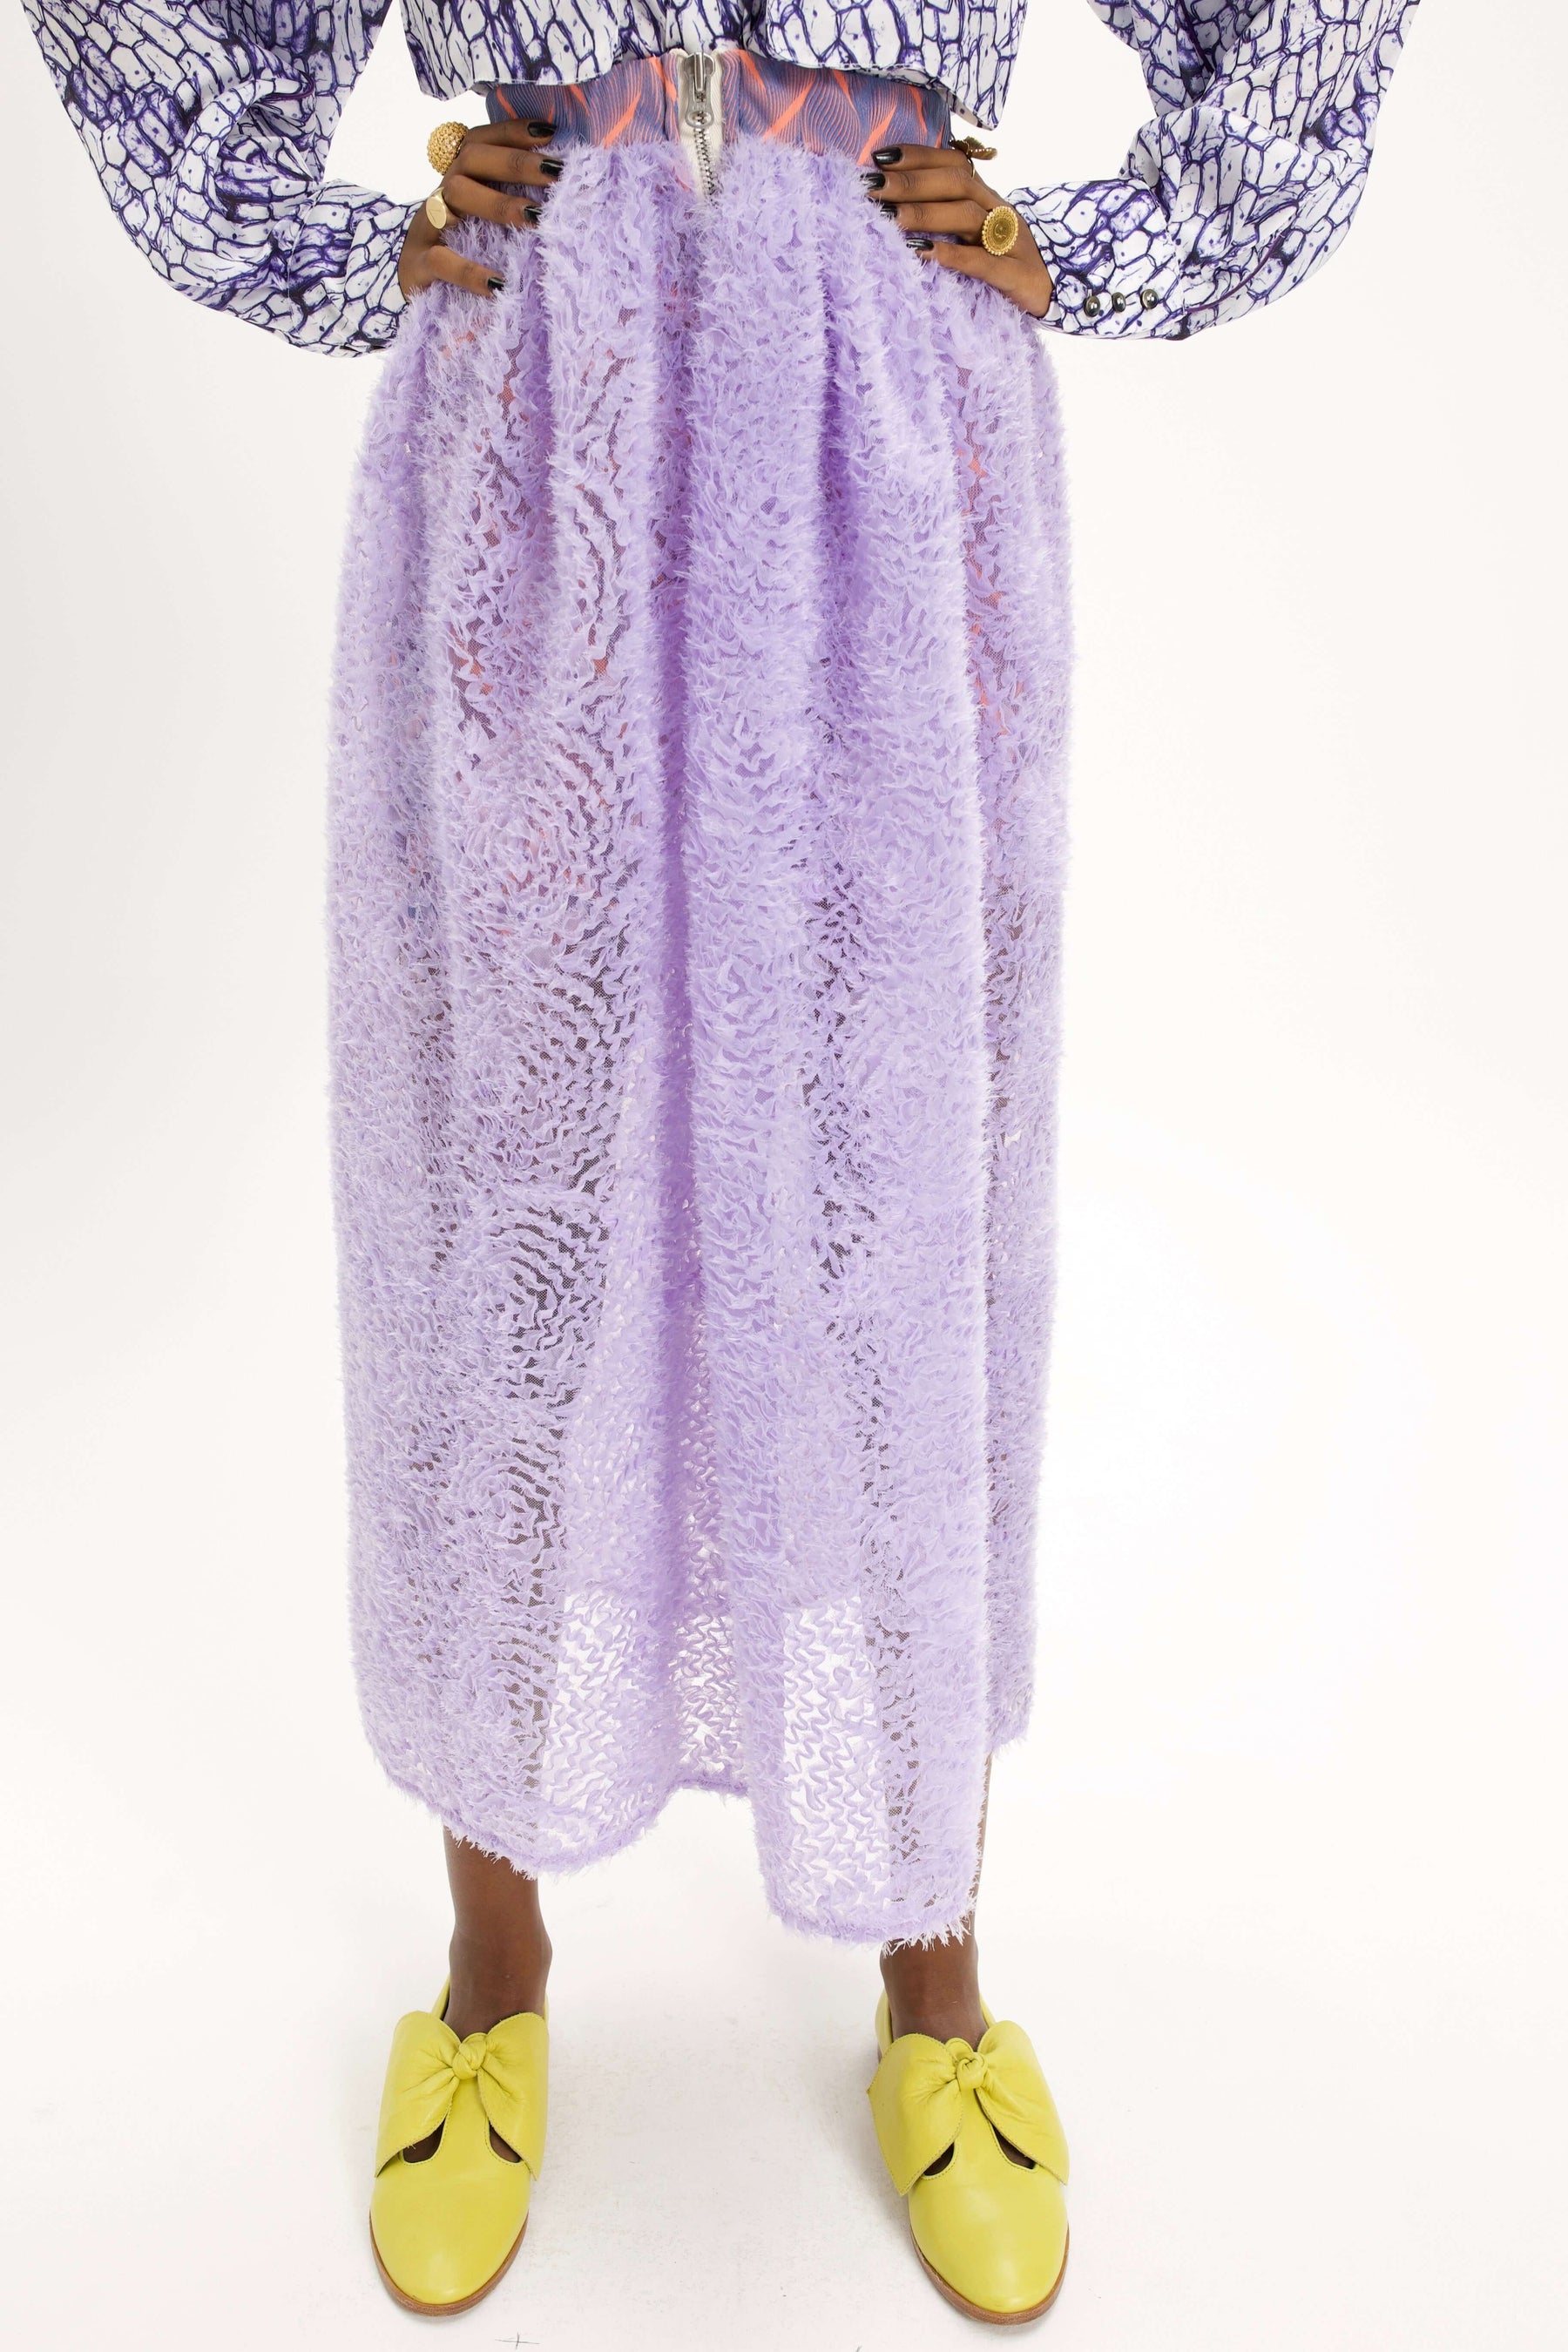 Cleo skirt in tufty voile parma